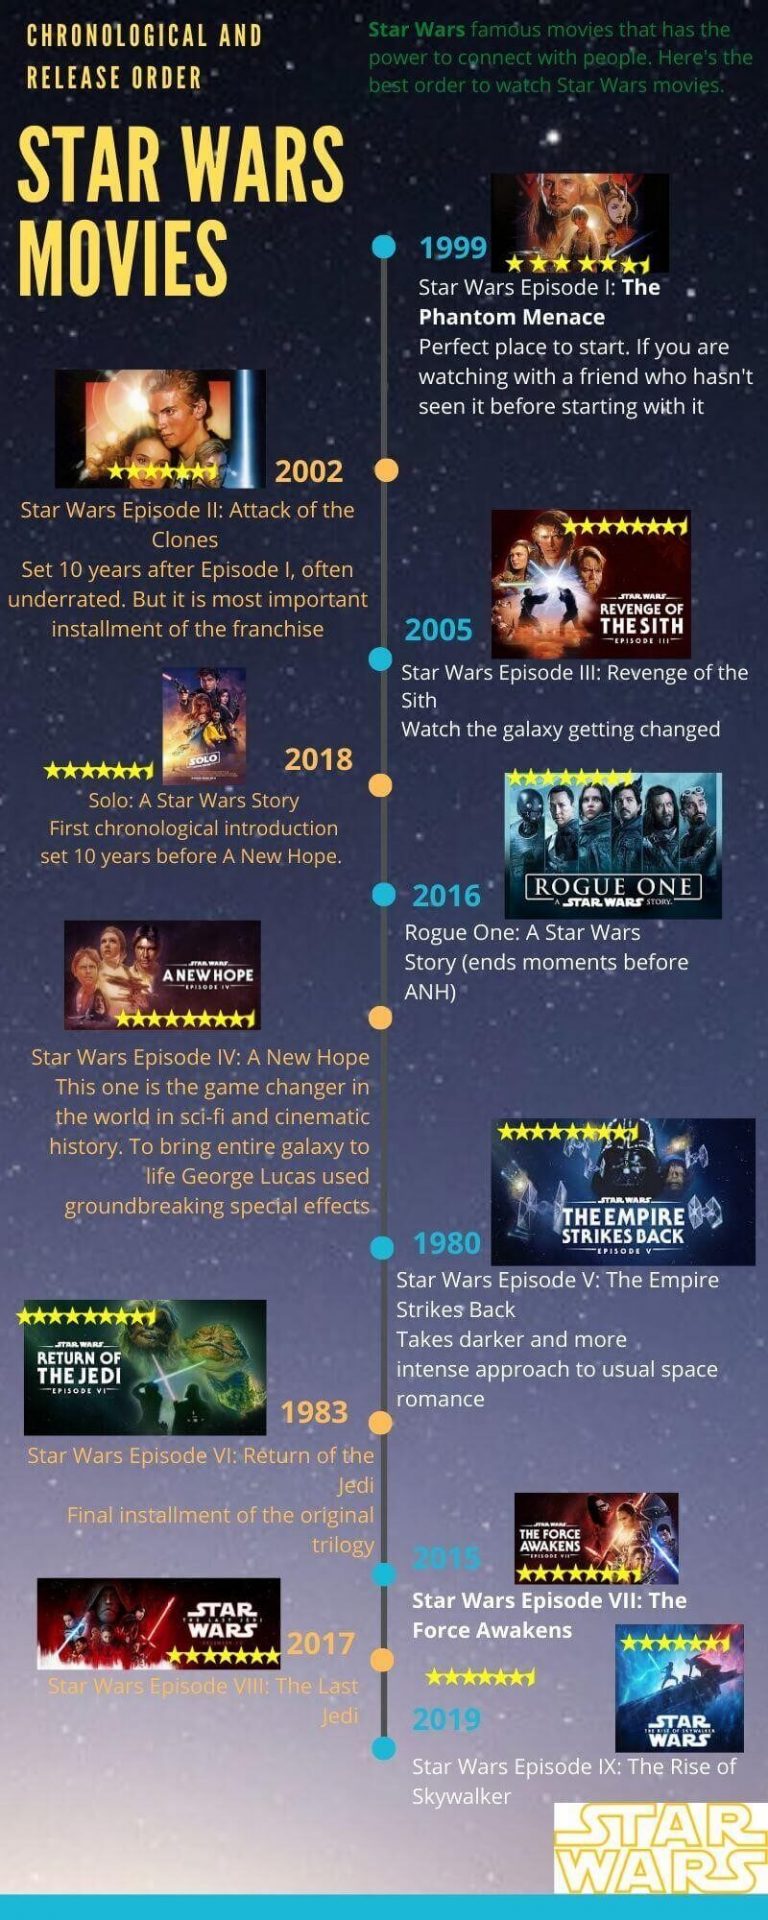 Star Wars Movies In Order Of Release The Star Wars Films In Order To